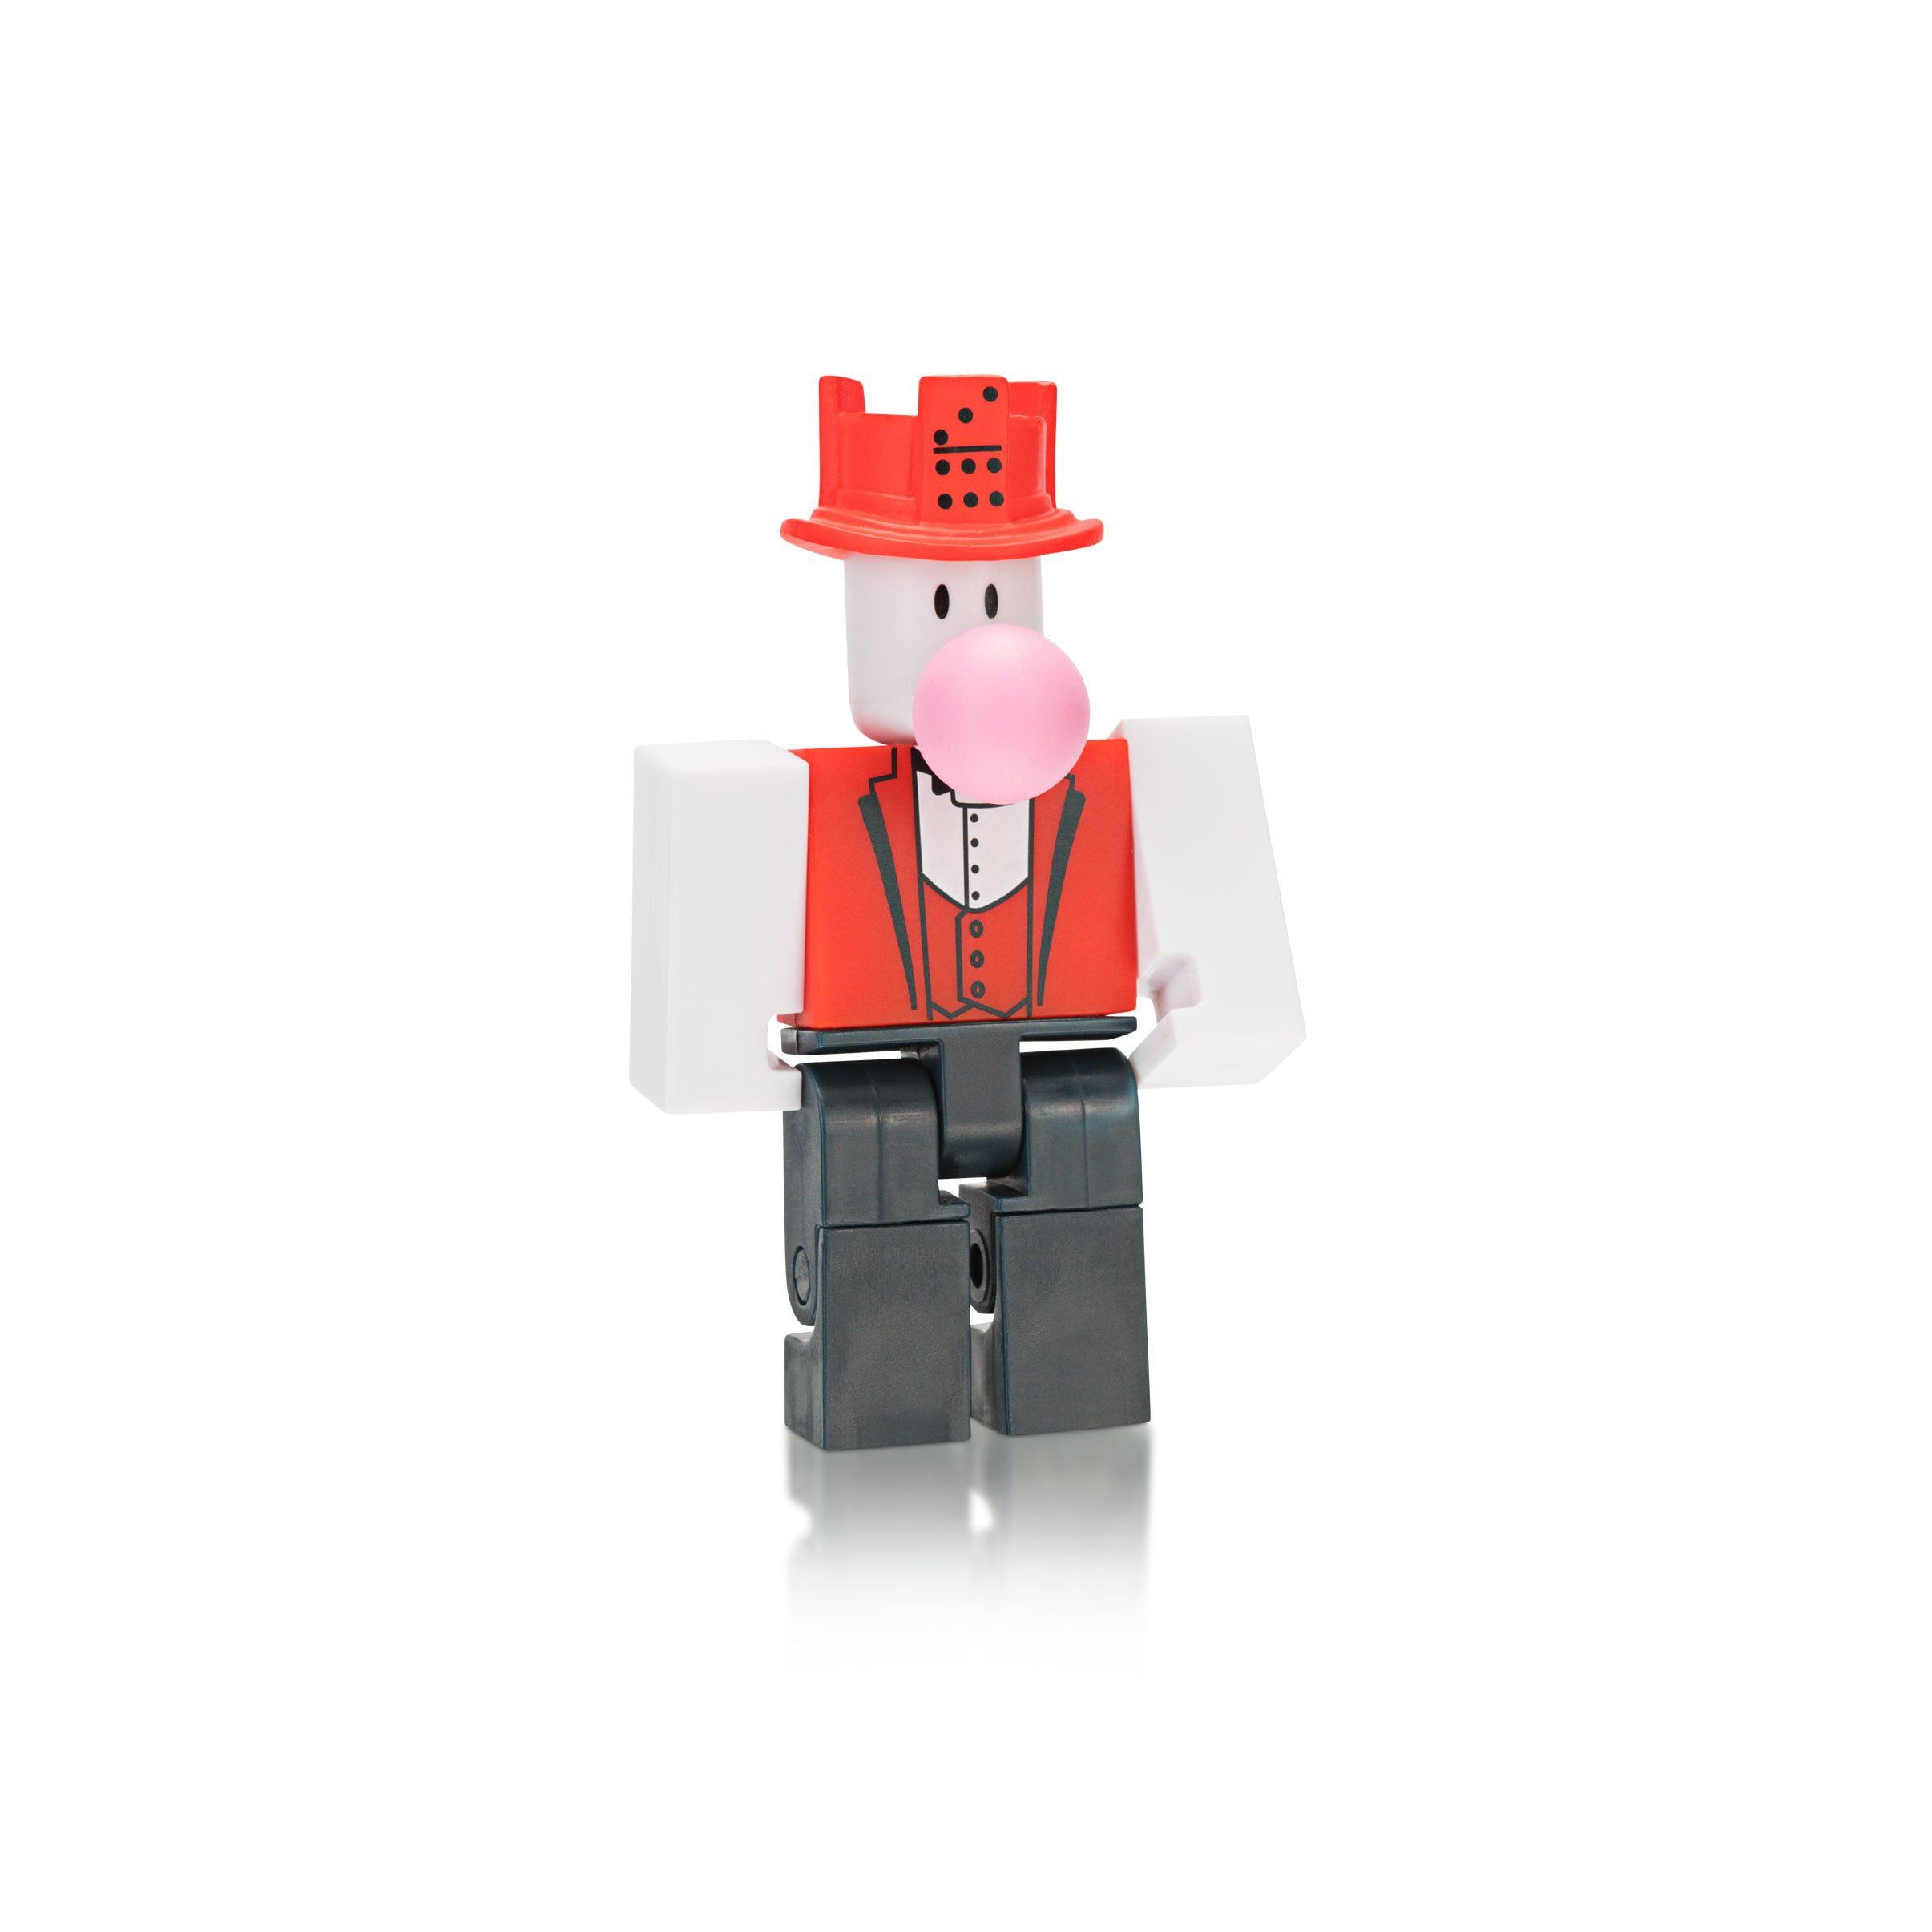 Roblox Action Collection Series 6 Mystery Figure Includes 1 Figure Exclusive Virtual Item Walmart Com Walmart Com - roblox action collection quest minion figure pack includes exclusive virtual item walmart com walmart com